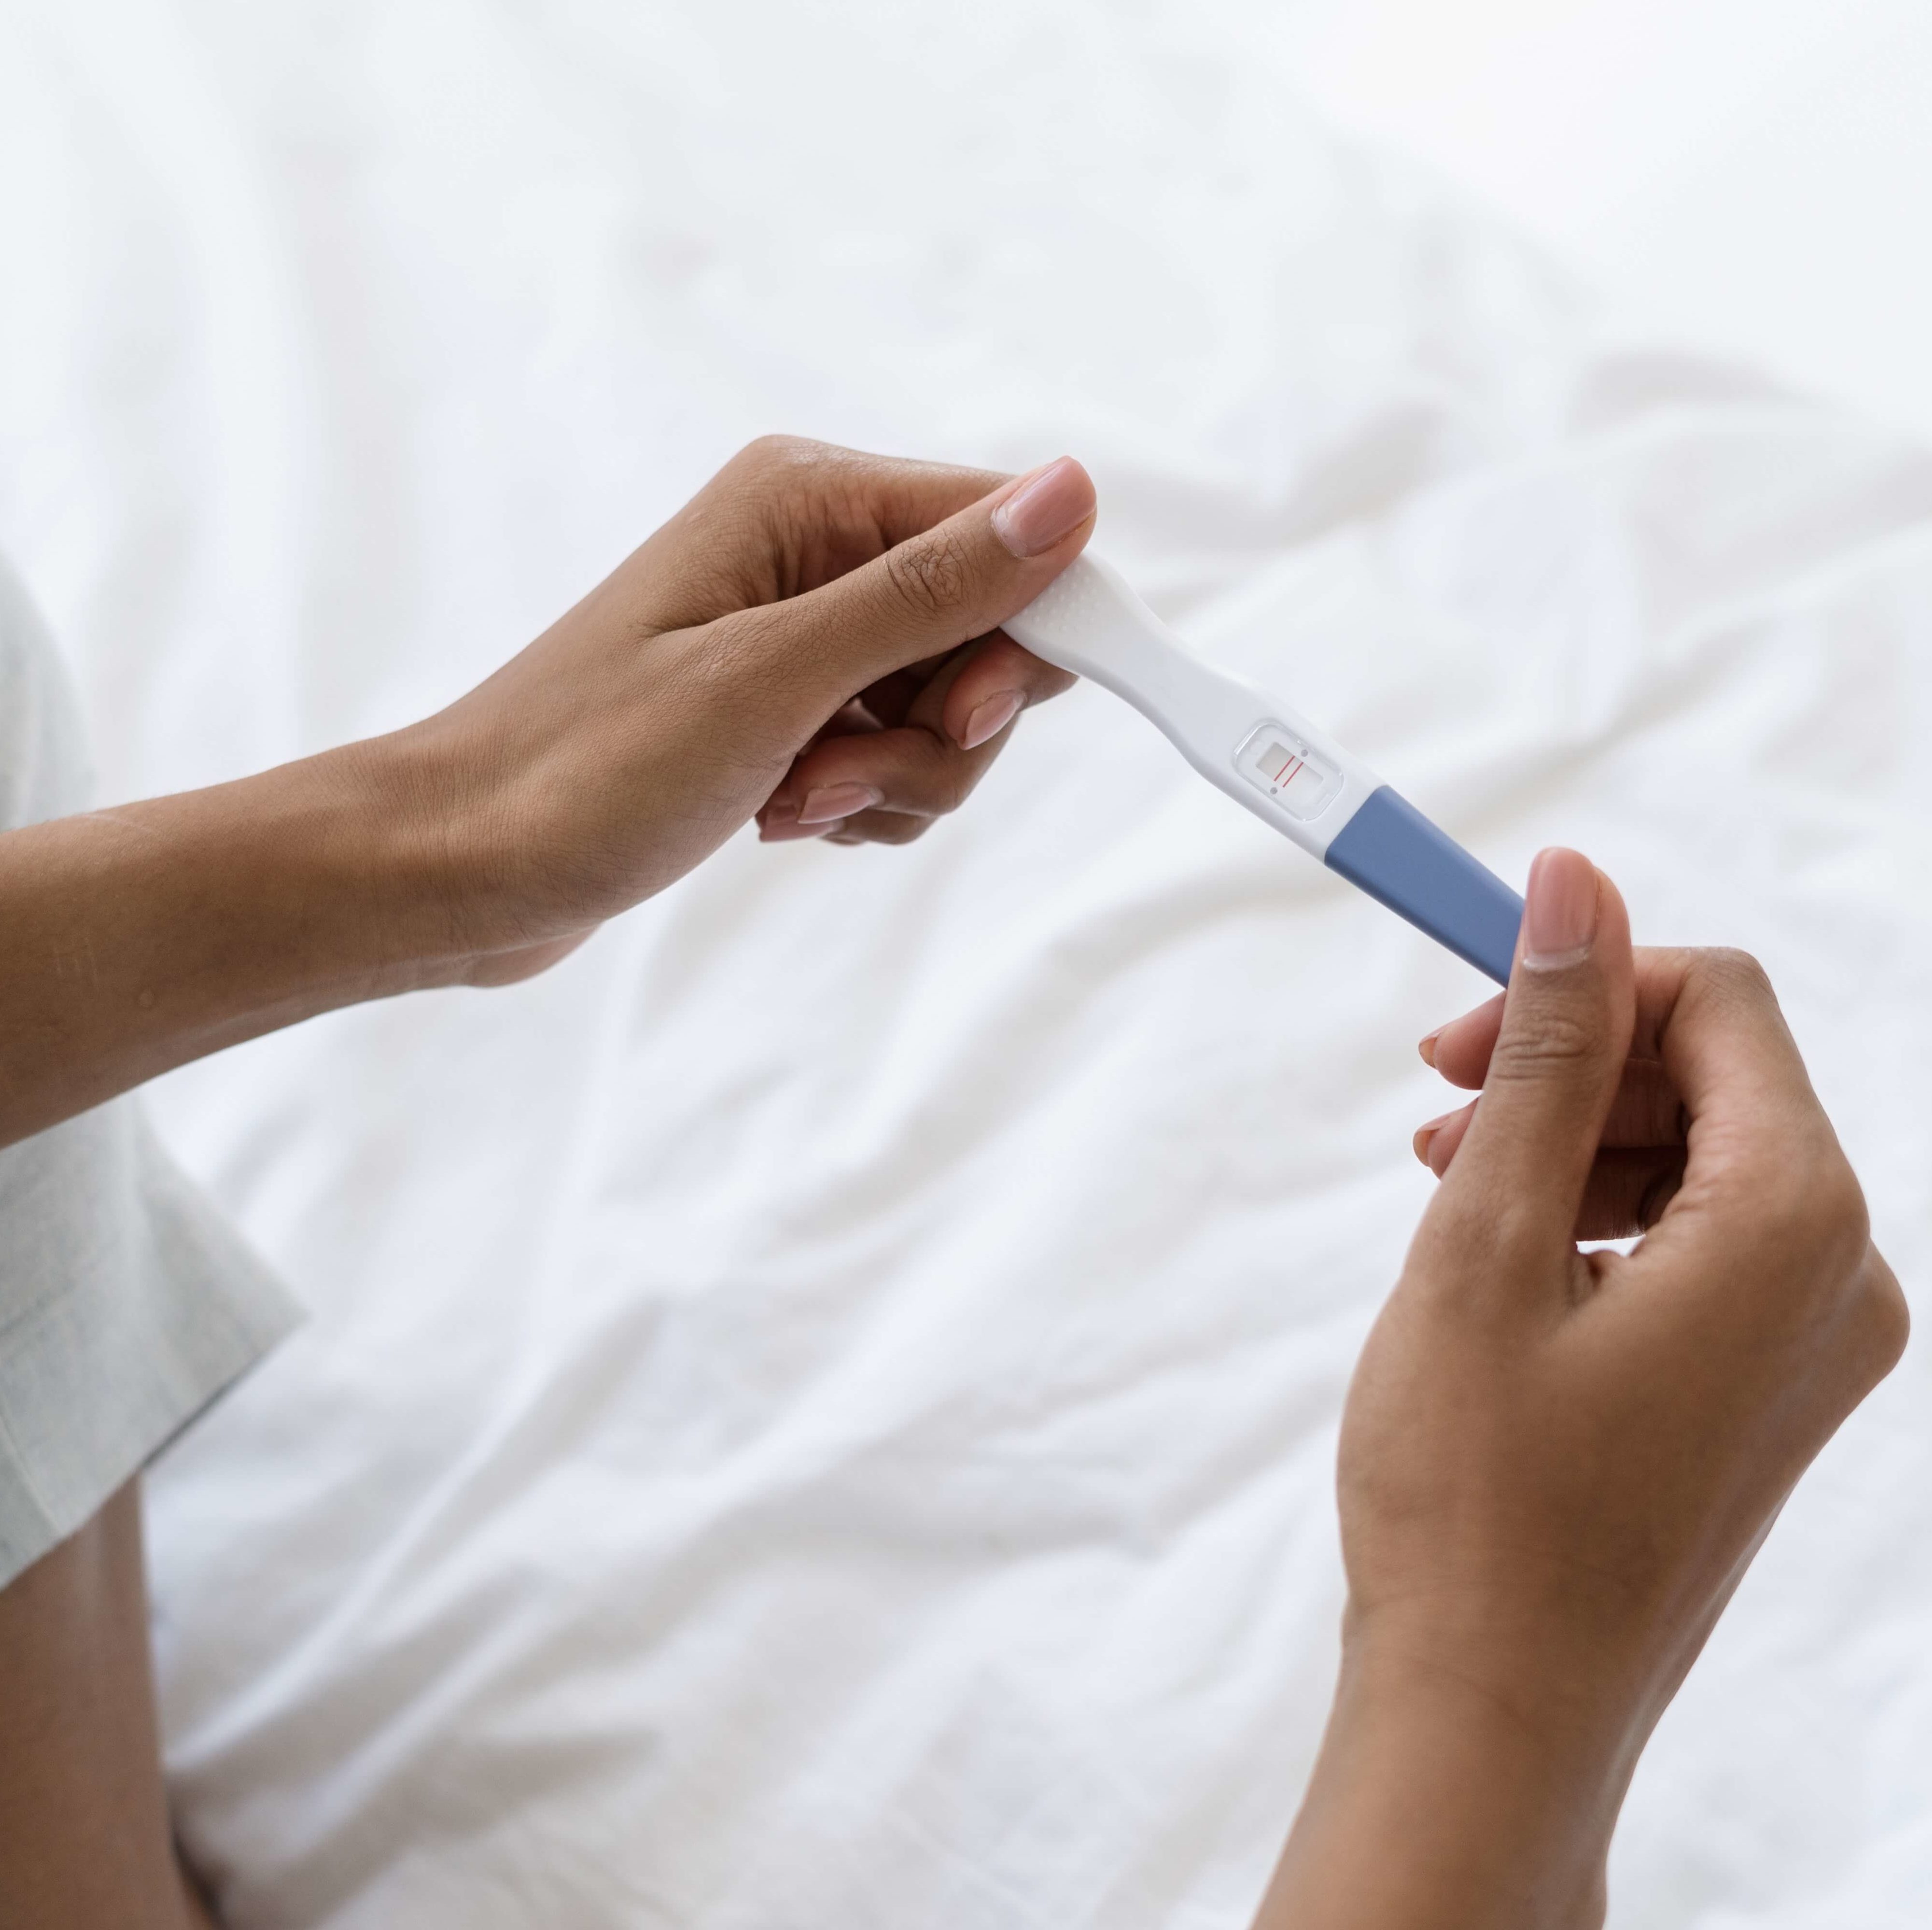 photo of a woman's hands holding a pregnancy test over a bed with white sheets